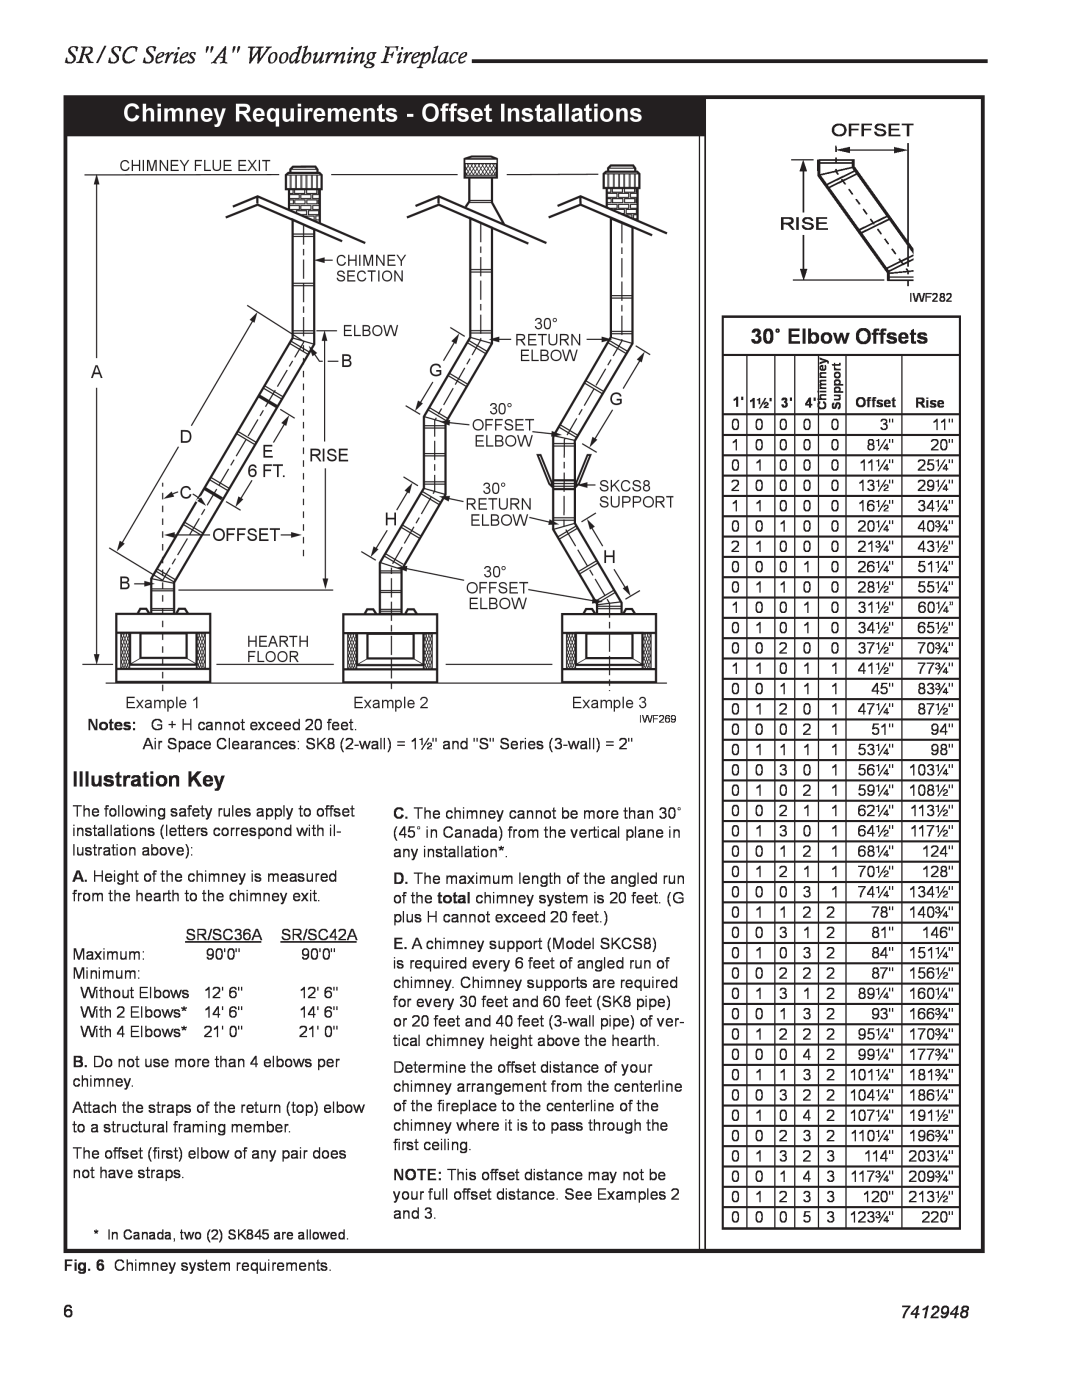 Majestic SC36A, SR42A, SC42A manual Chimney Requirements - Offset Installations, 30˚ Elbow Offsets, Illustration Key, 7412948 